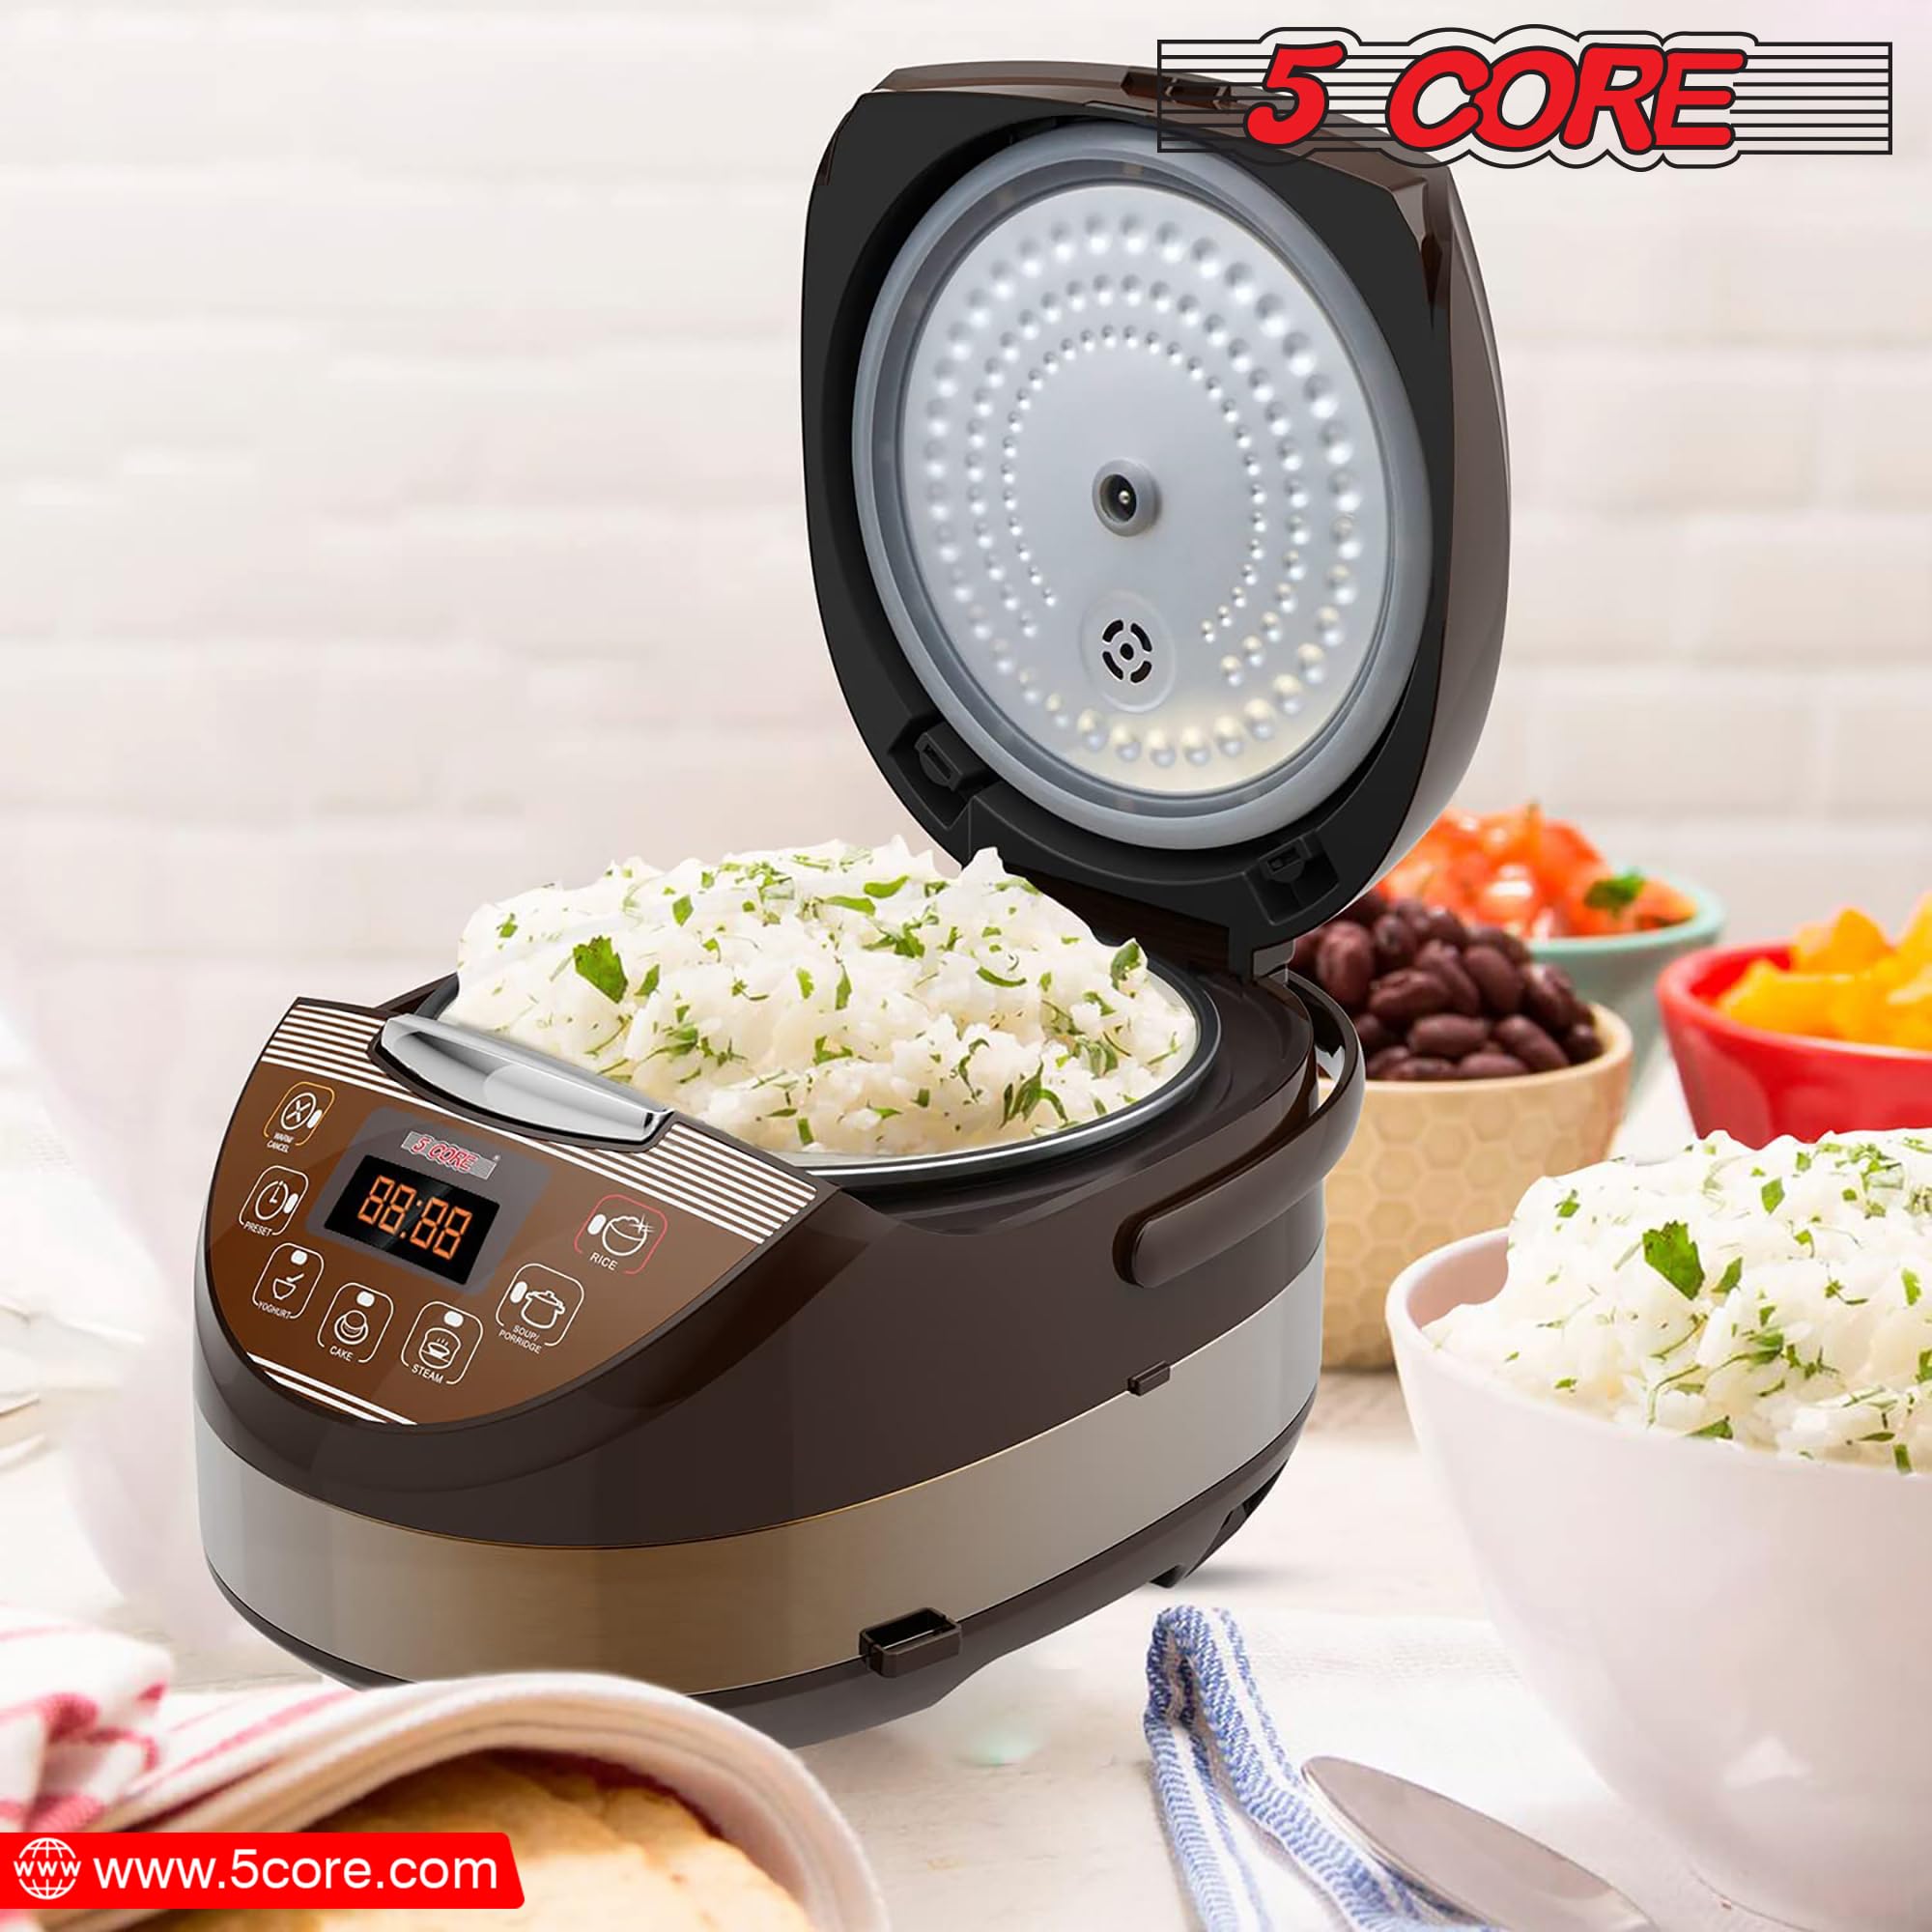 5 Core 5.3Qt Asian Rice Cooker Digital Programmable 15-in-1 Ergonomic Large soft Touch push button Electric Multi Cooker, Steamer Pot, Warmer 21 Cups 24 Hour Delay Timer Auto Keep Warm Feature RC 0502